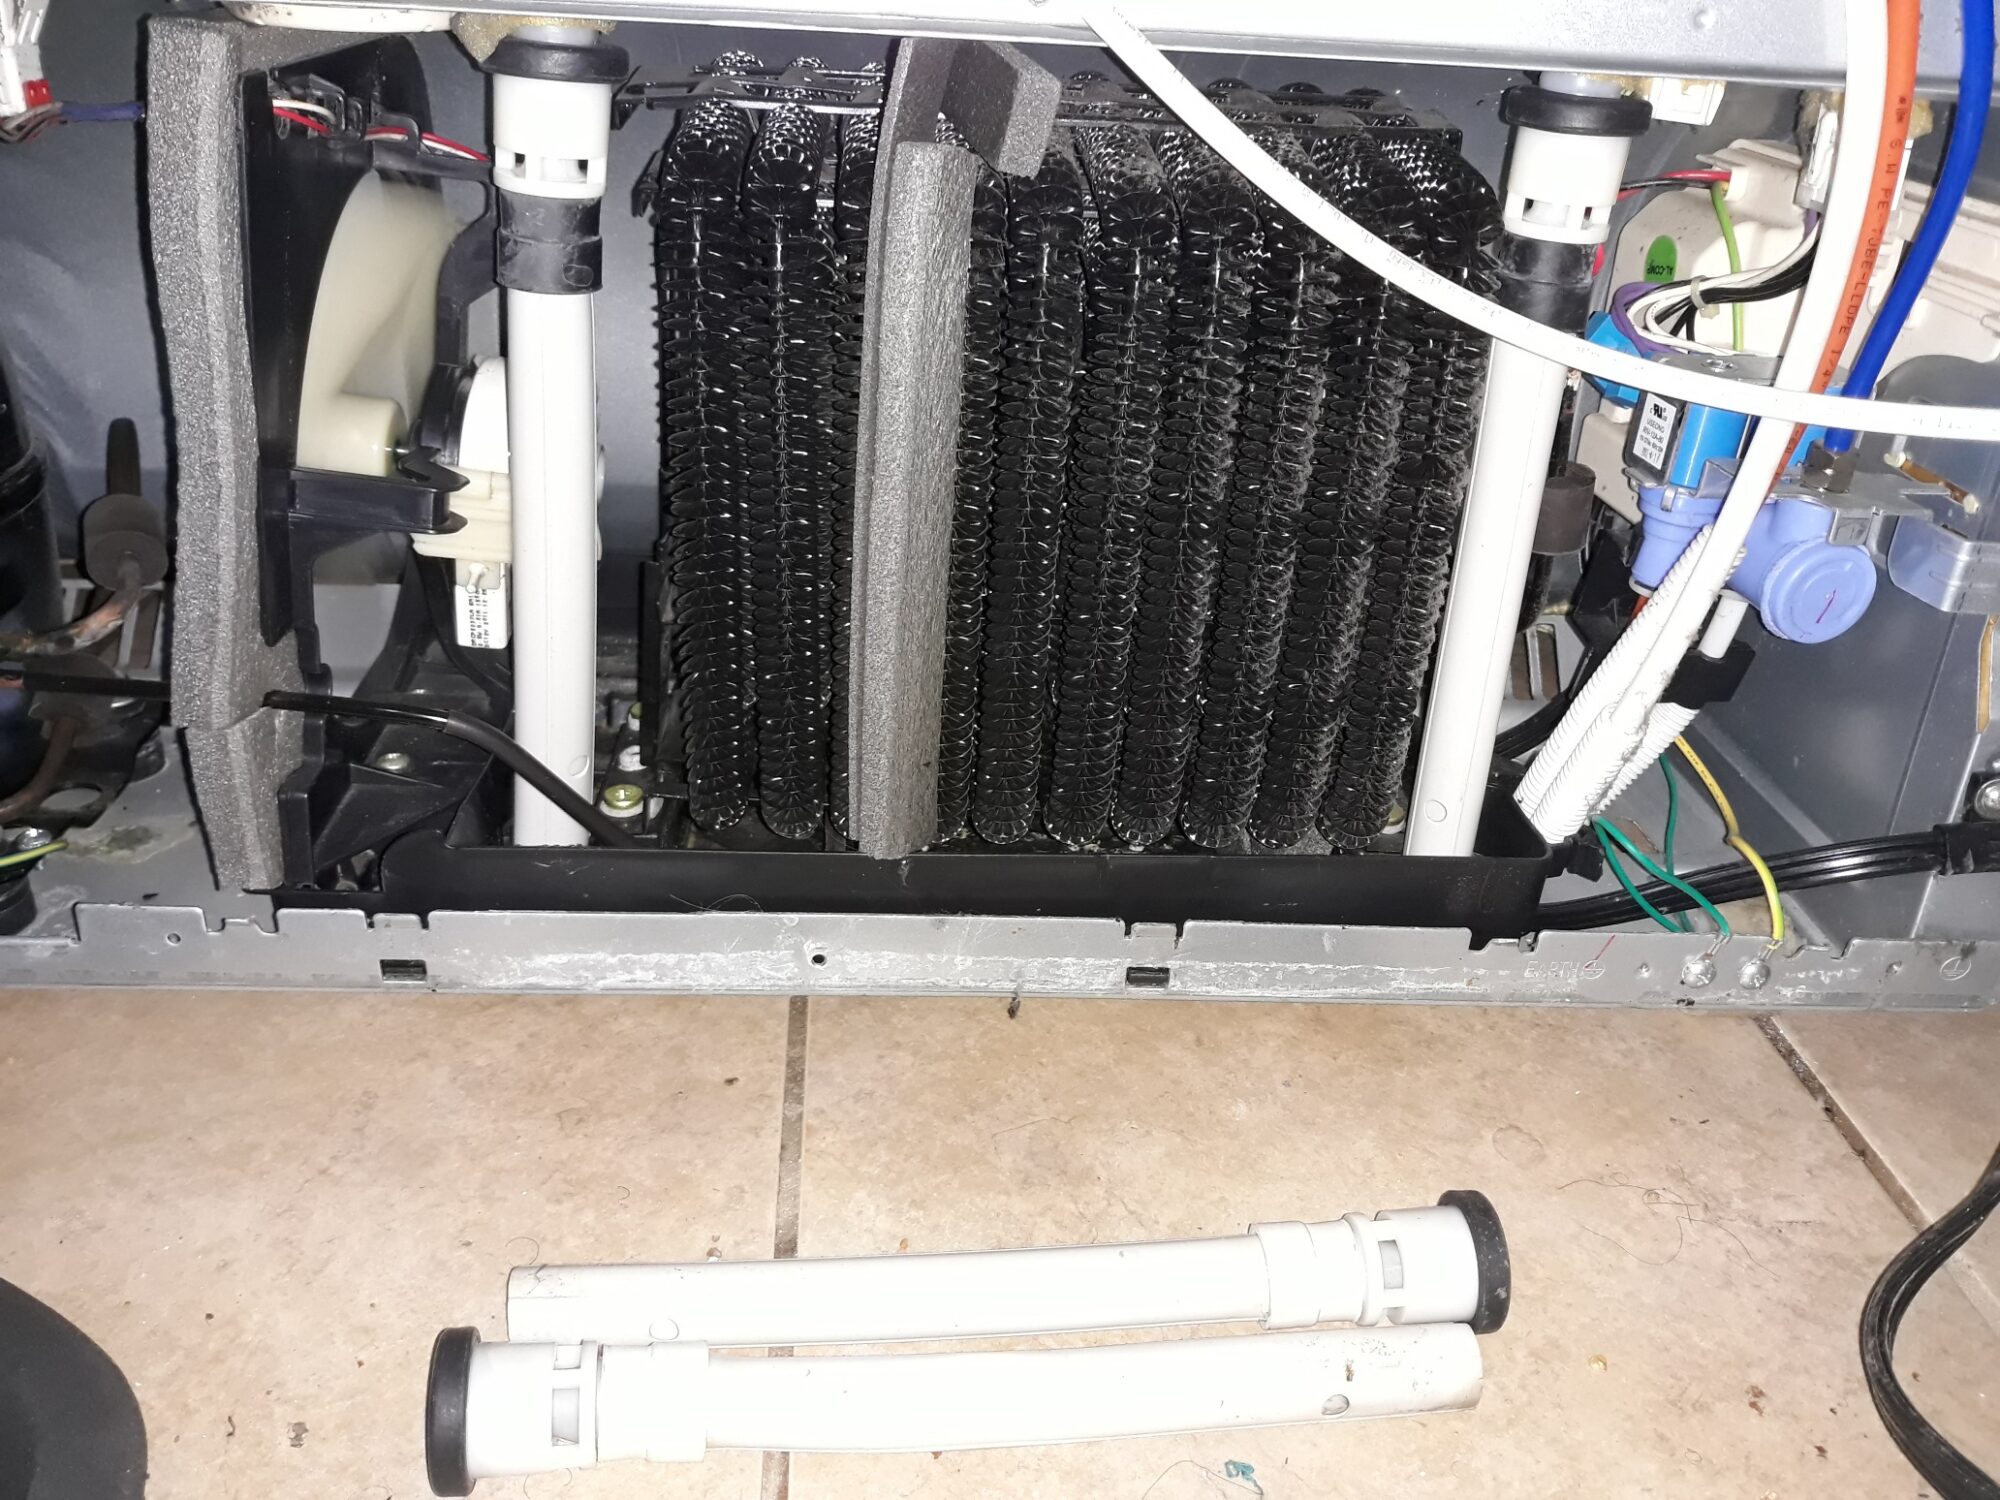 appliance repair refrigerator repair replacement of the old design drains with the new upgraded drains country road grand island eustis fl 32726